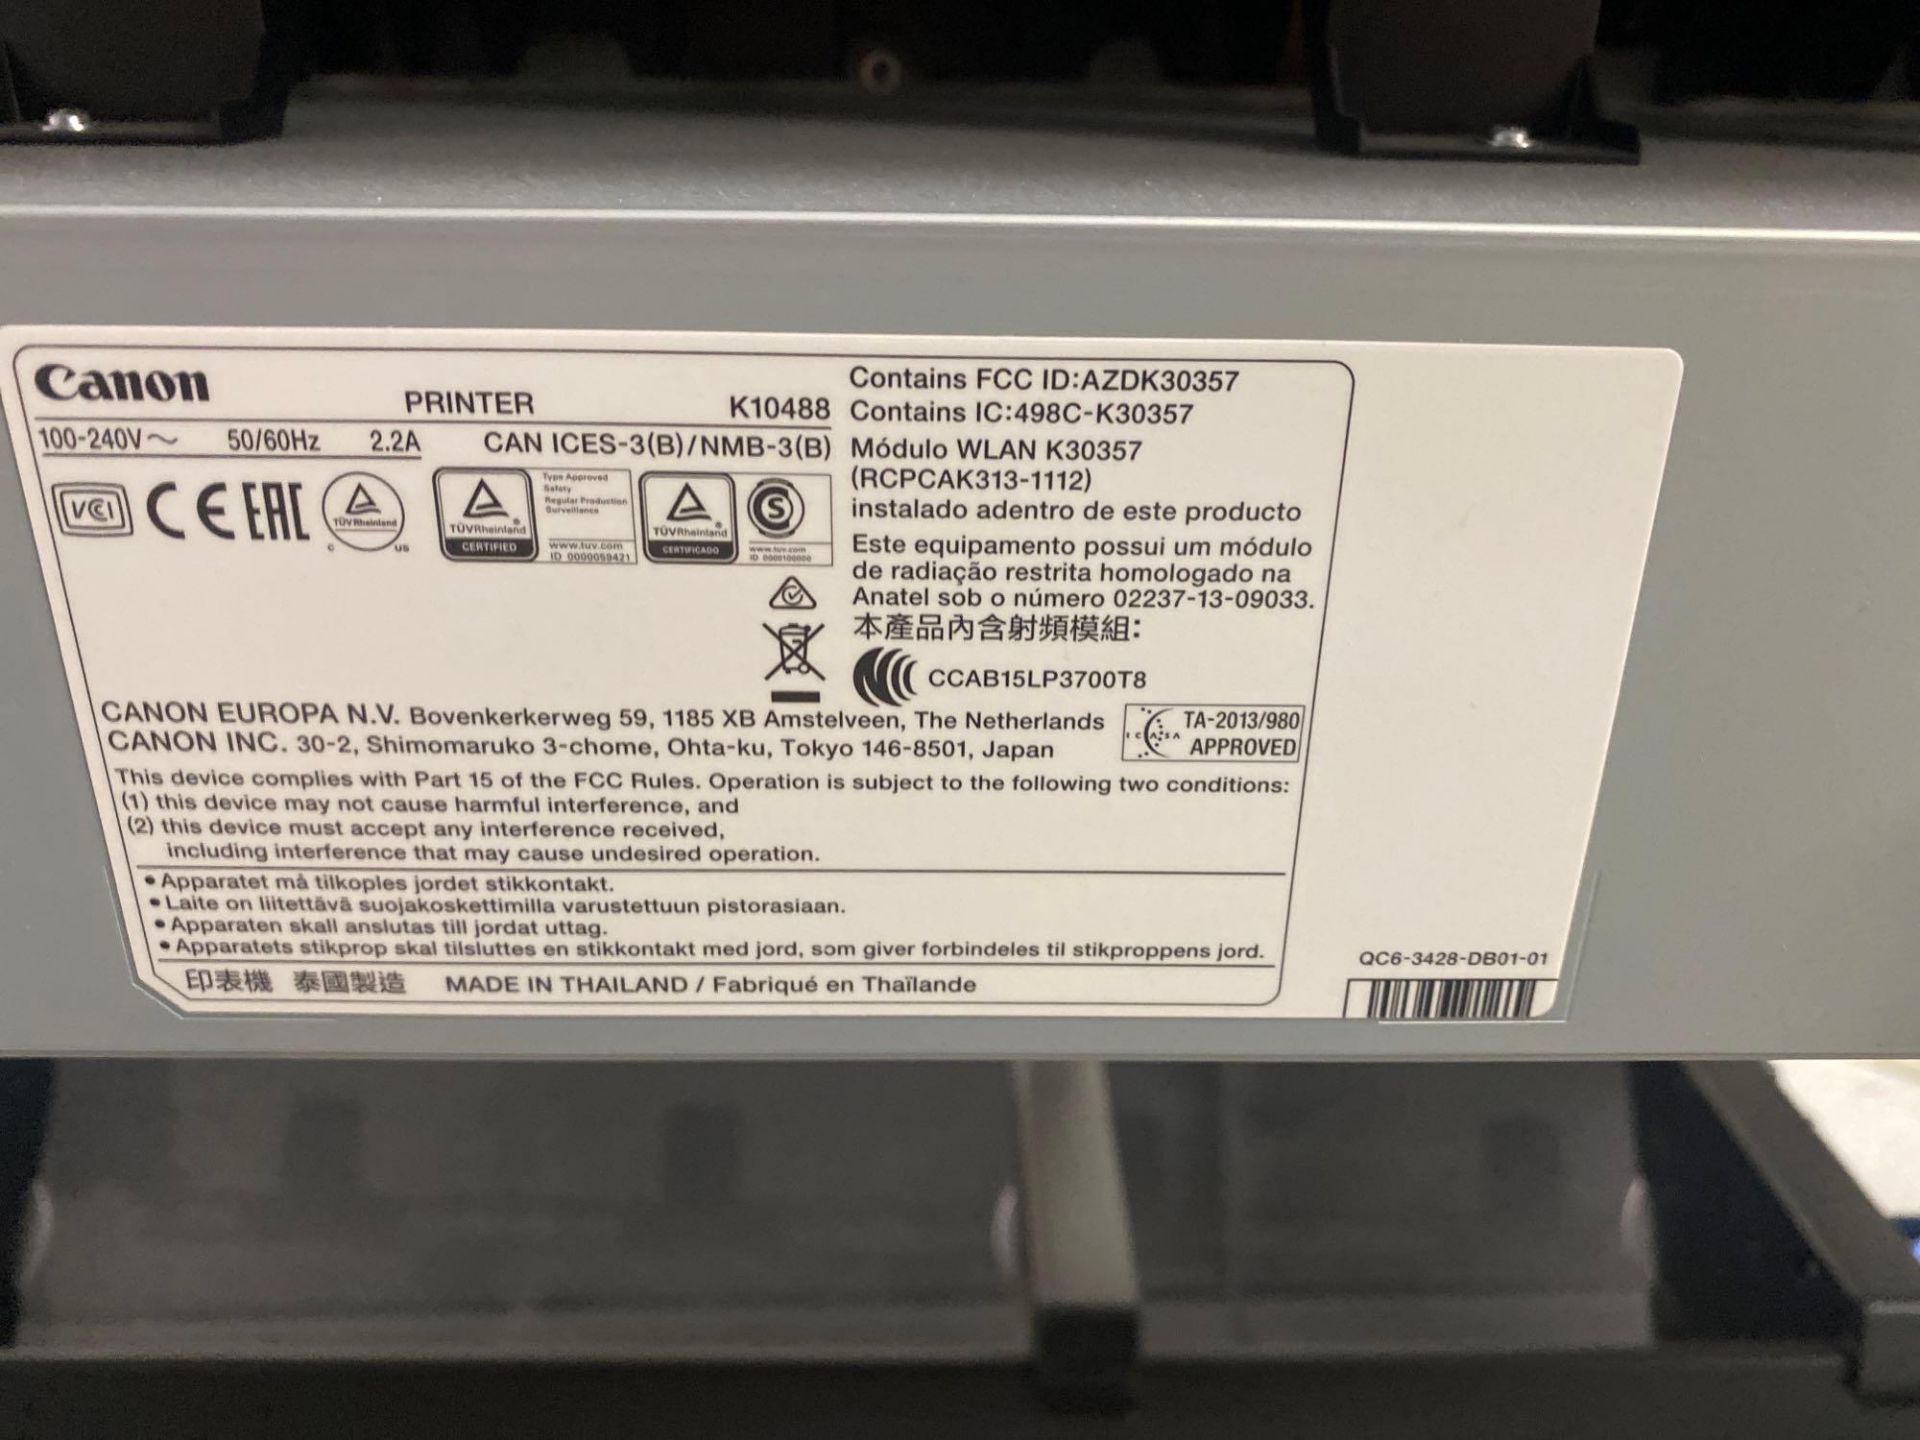 Canon image Prograp model TM – 300 K10488, 3’ wide carriage printer serial number BALB01456 - Image 6 of 7